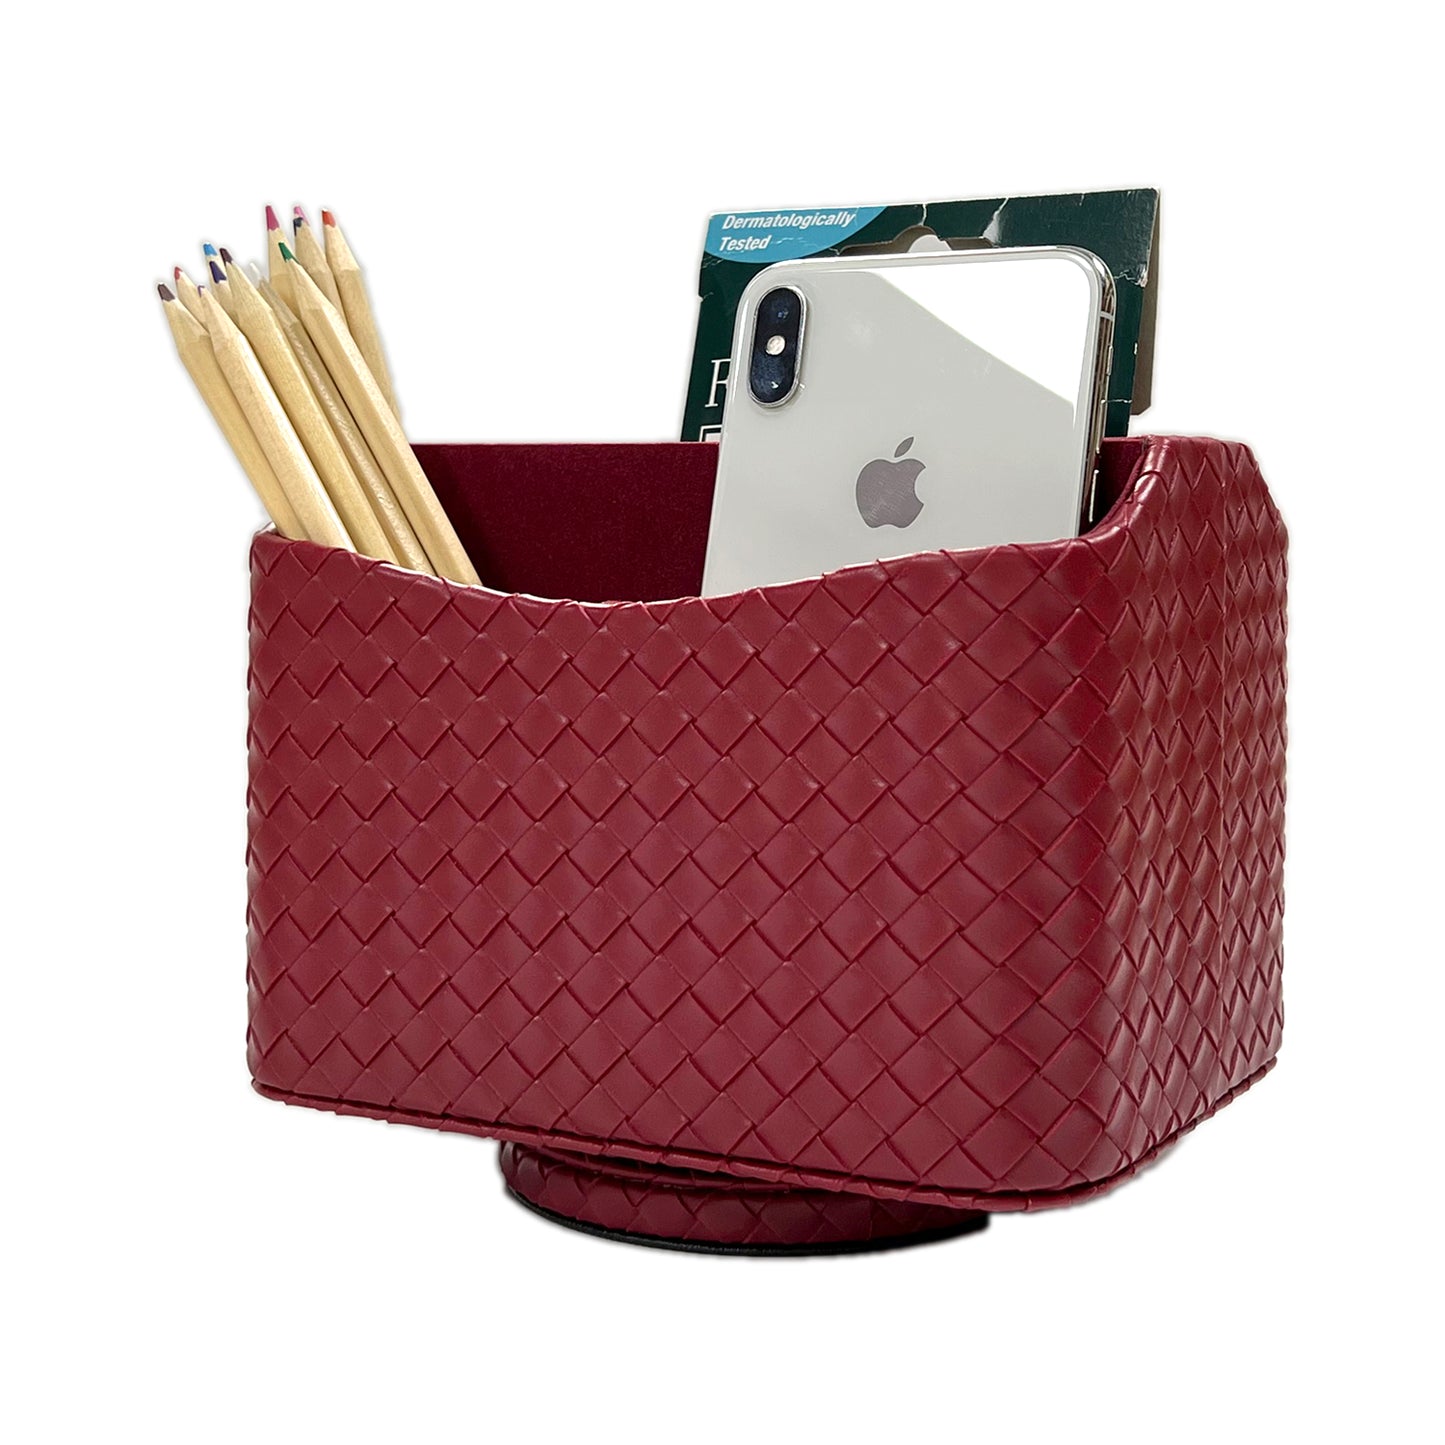 UnionBasic Rotating Desk Organizer, 360 Degree Desk Spinning Caddy, Woven Pattern Faux Leather